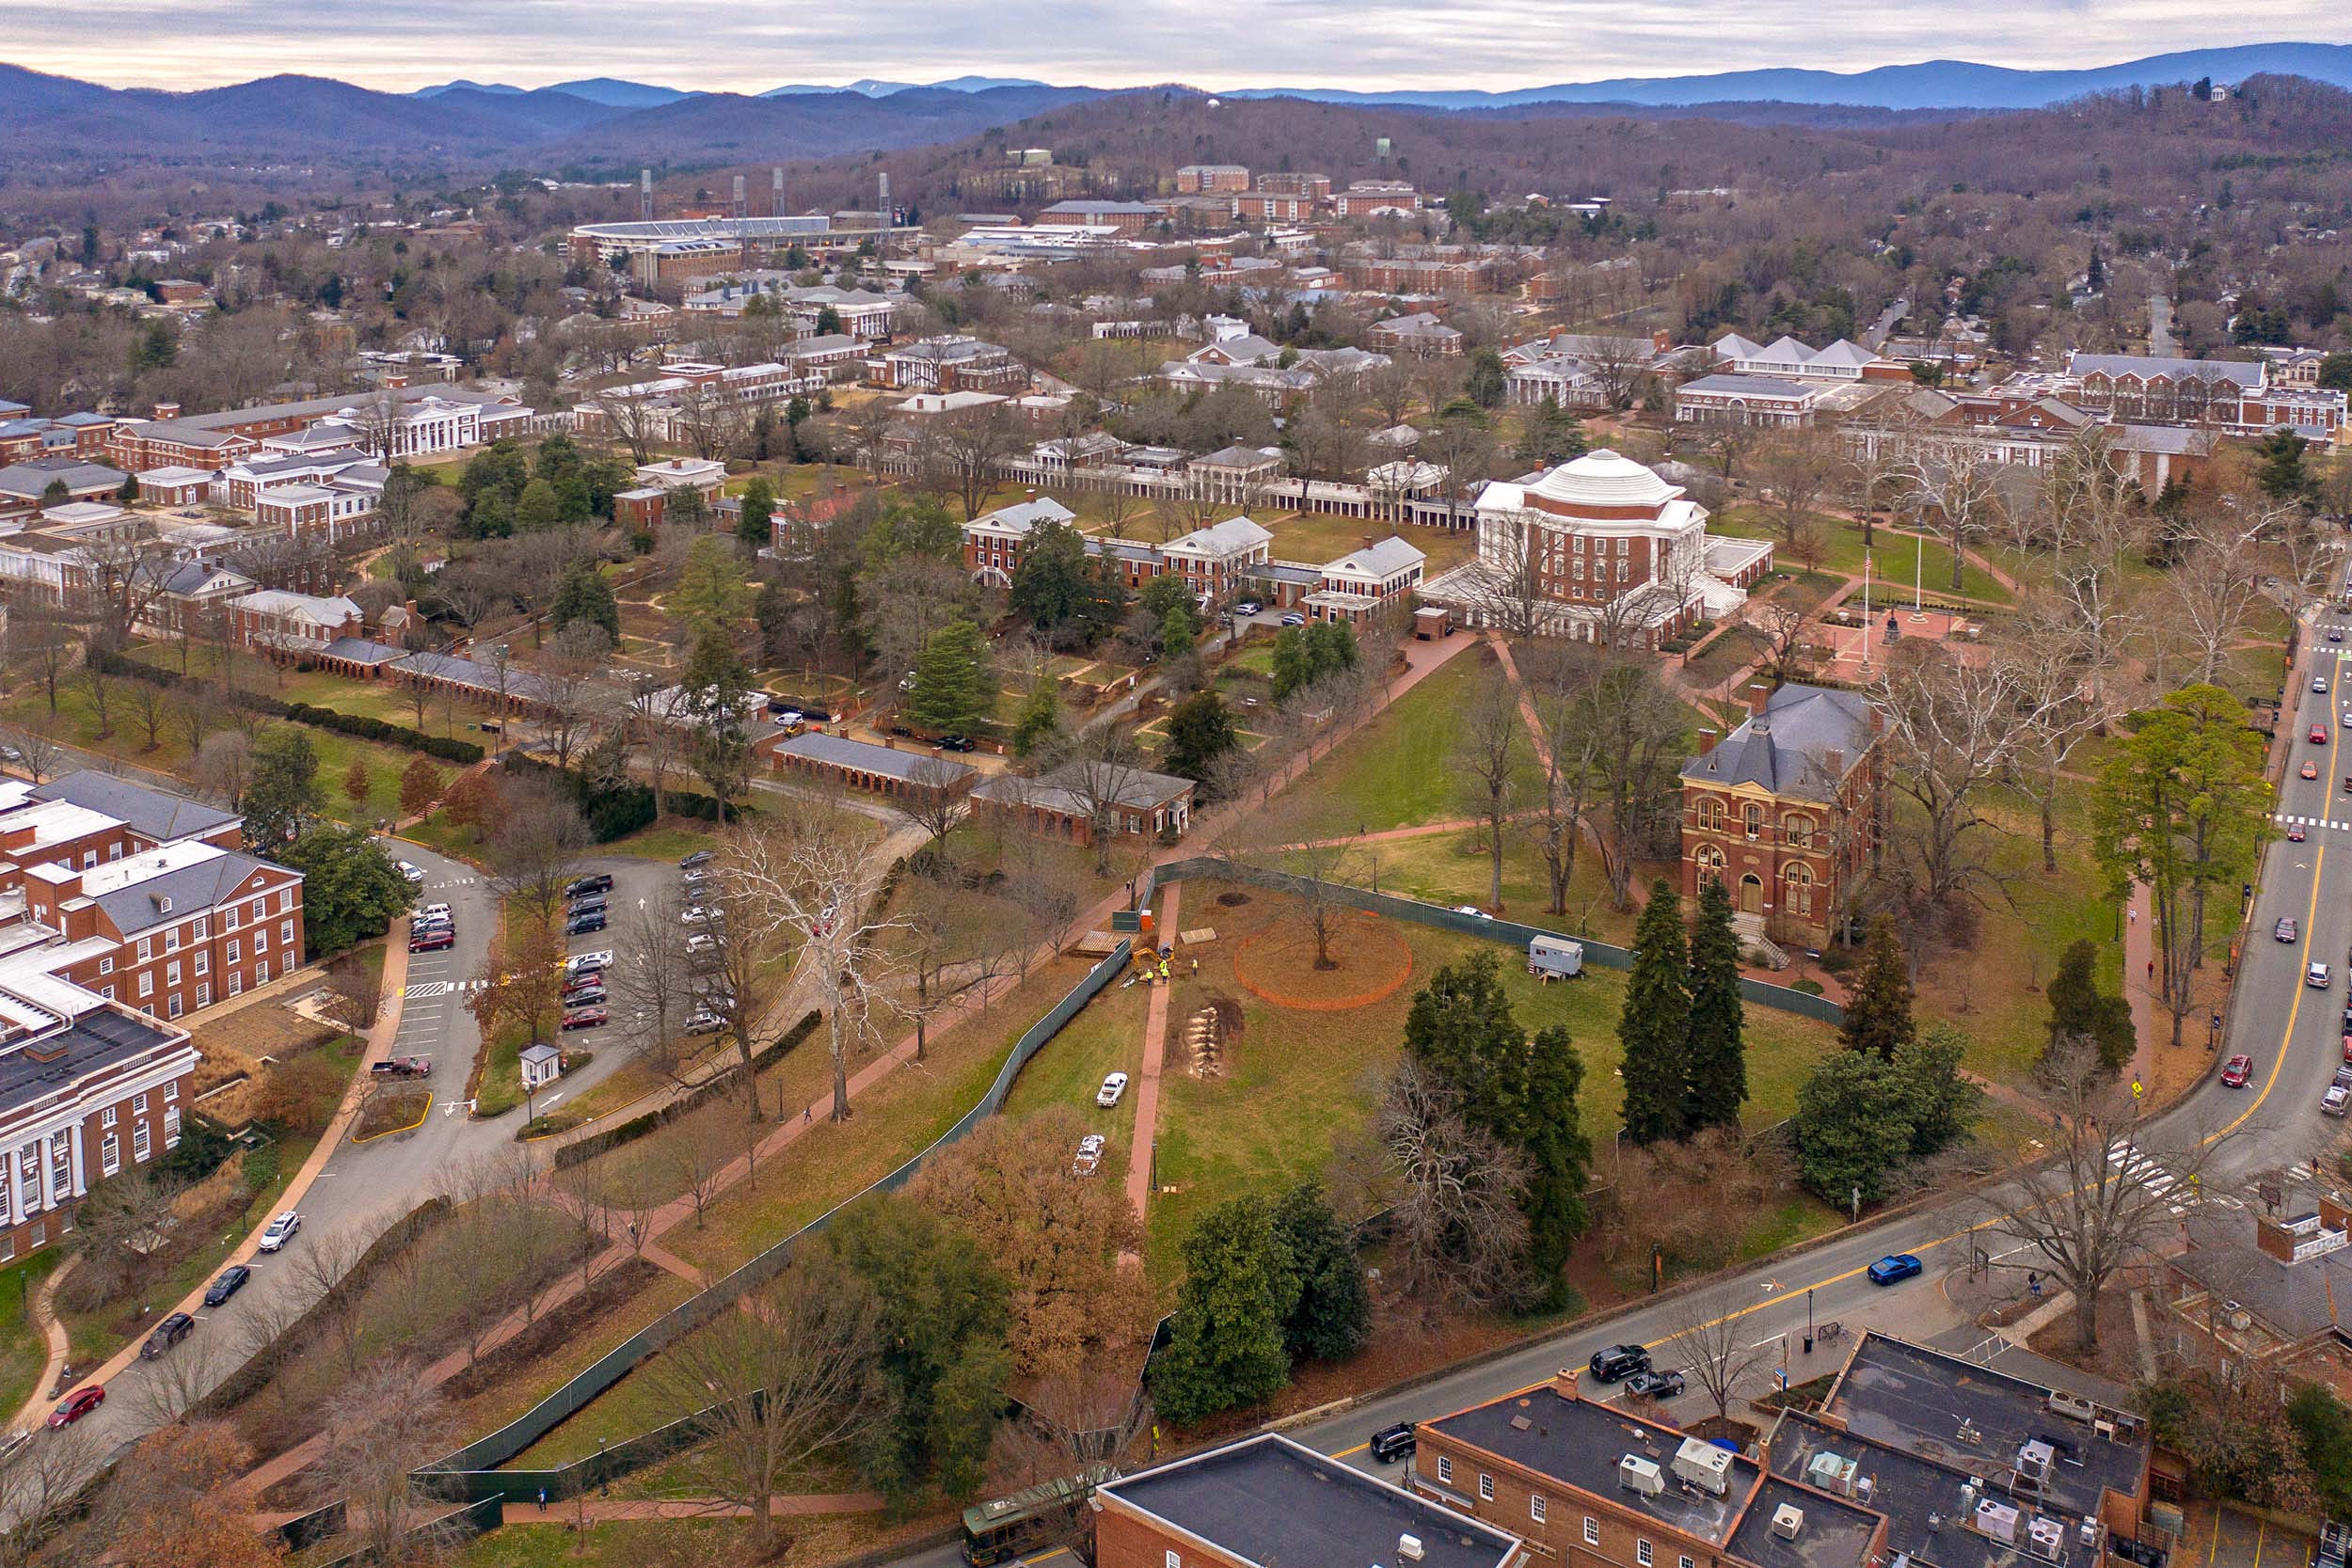 Aerial view of the Rotunda and surrounding area